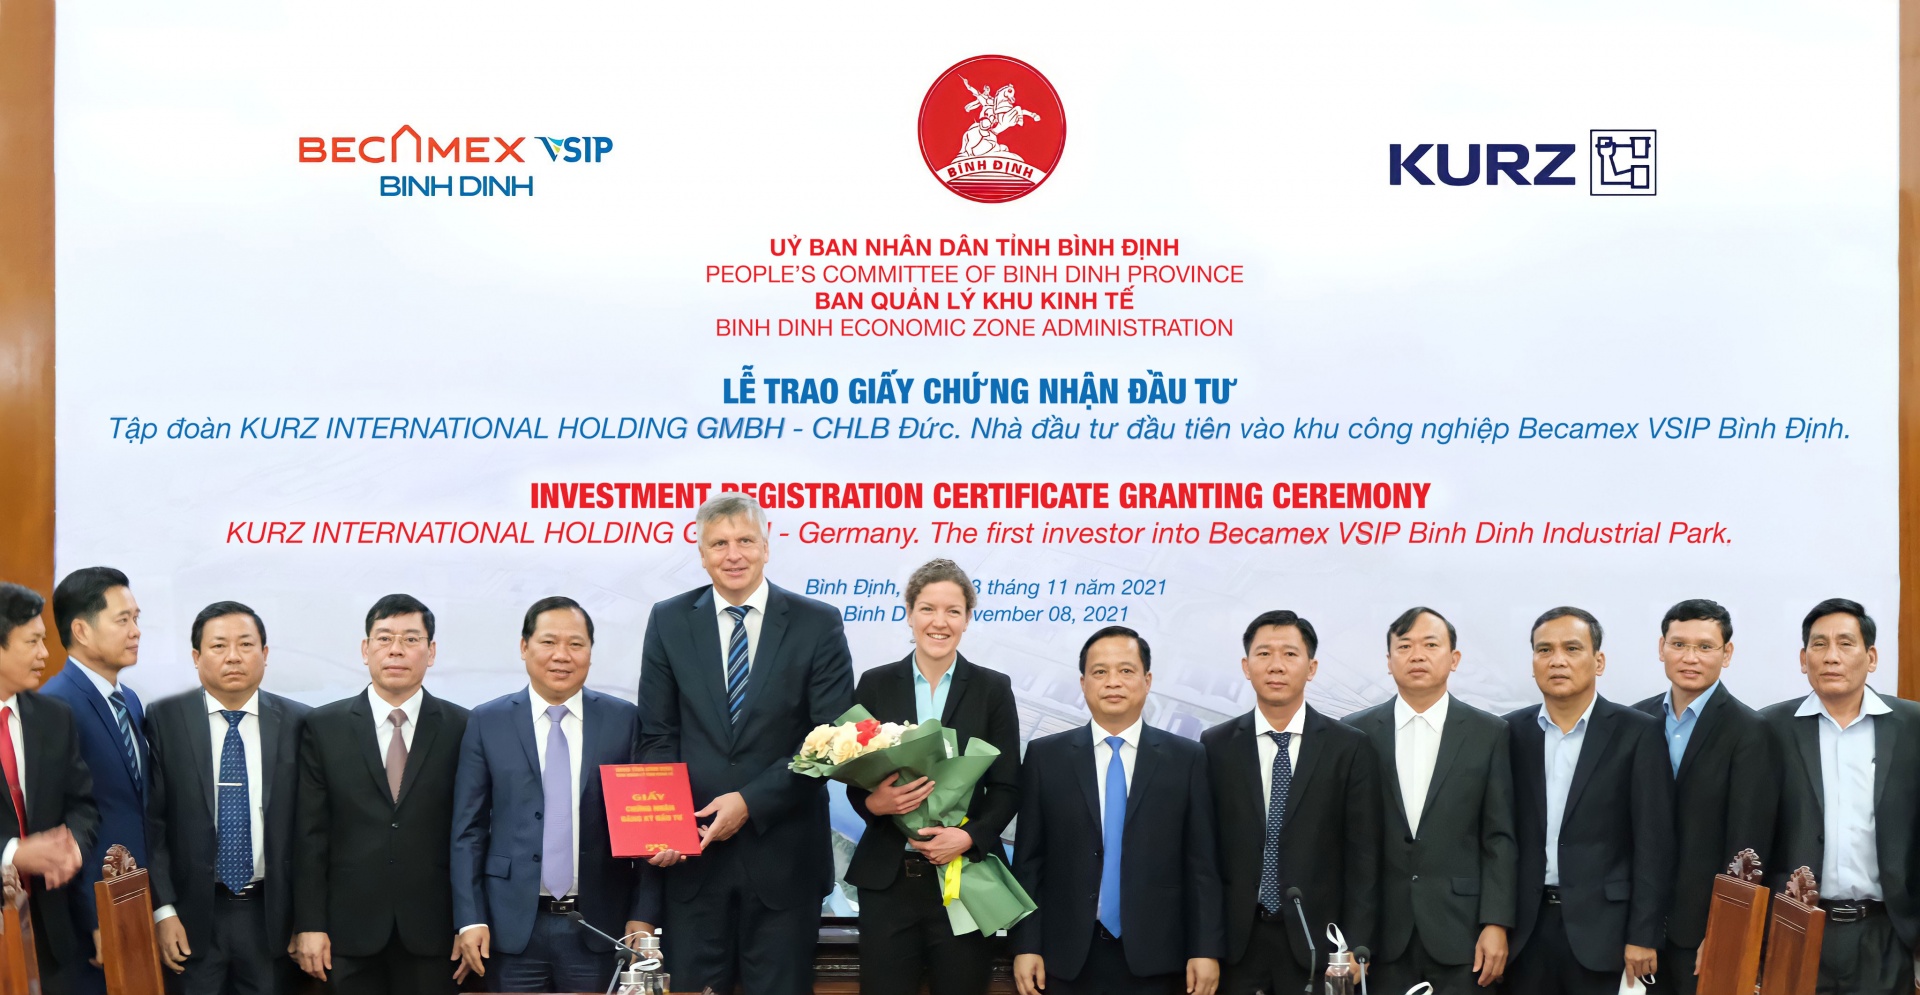 KURZ Group to develop a $40 million factory in Becamex VSIP Binh Dinh